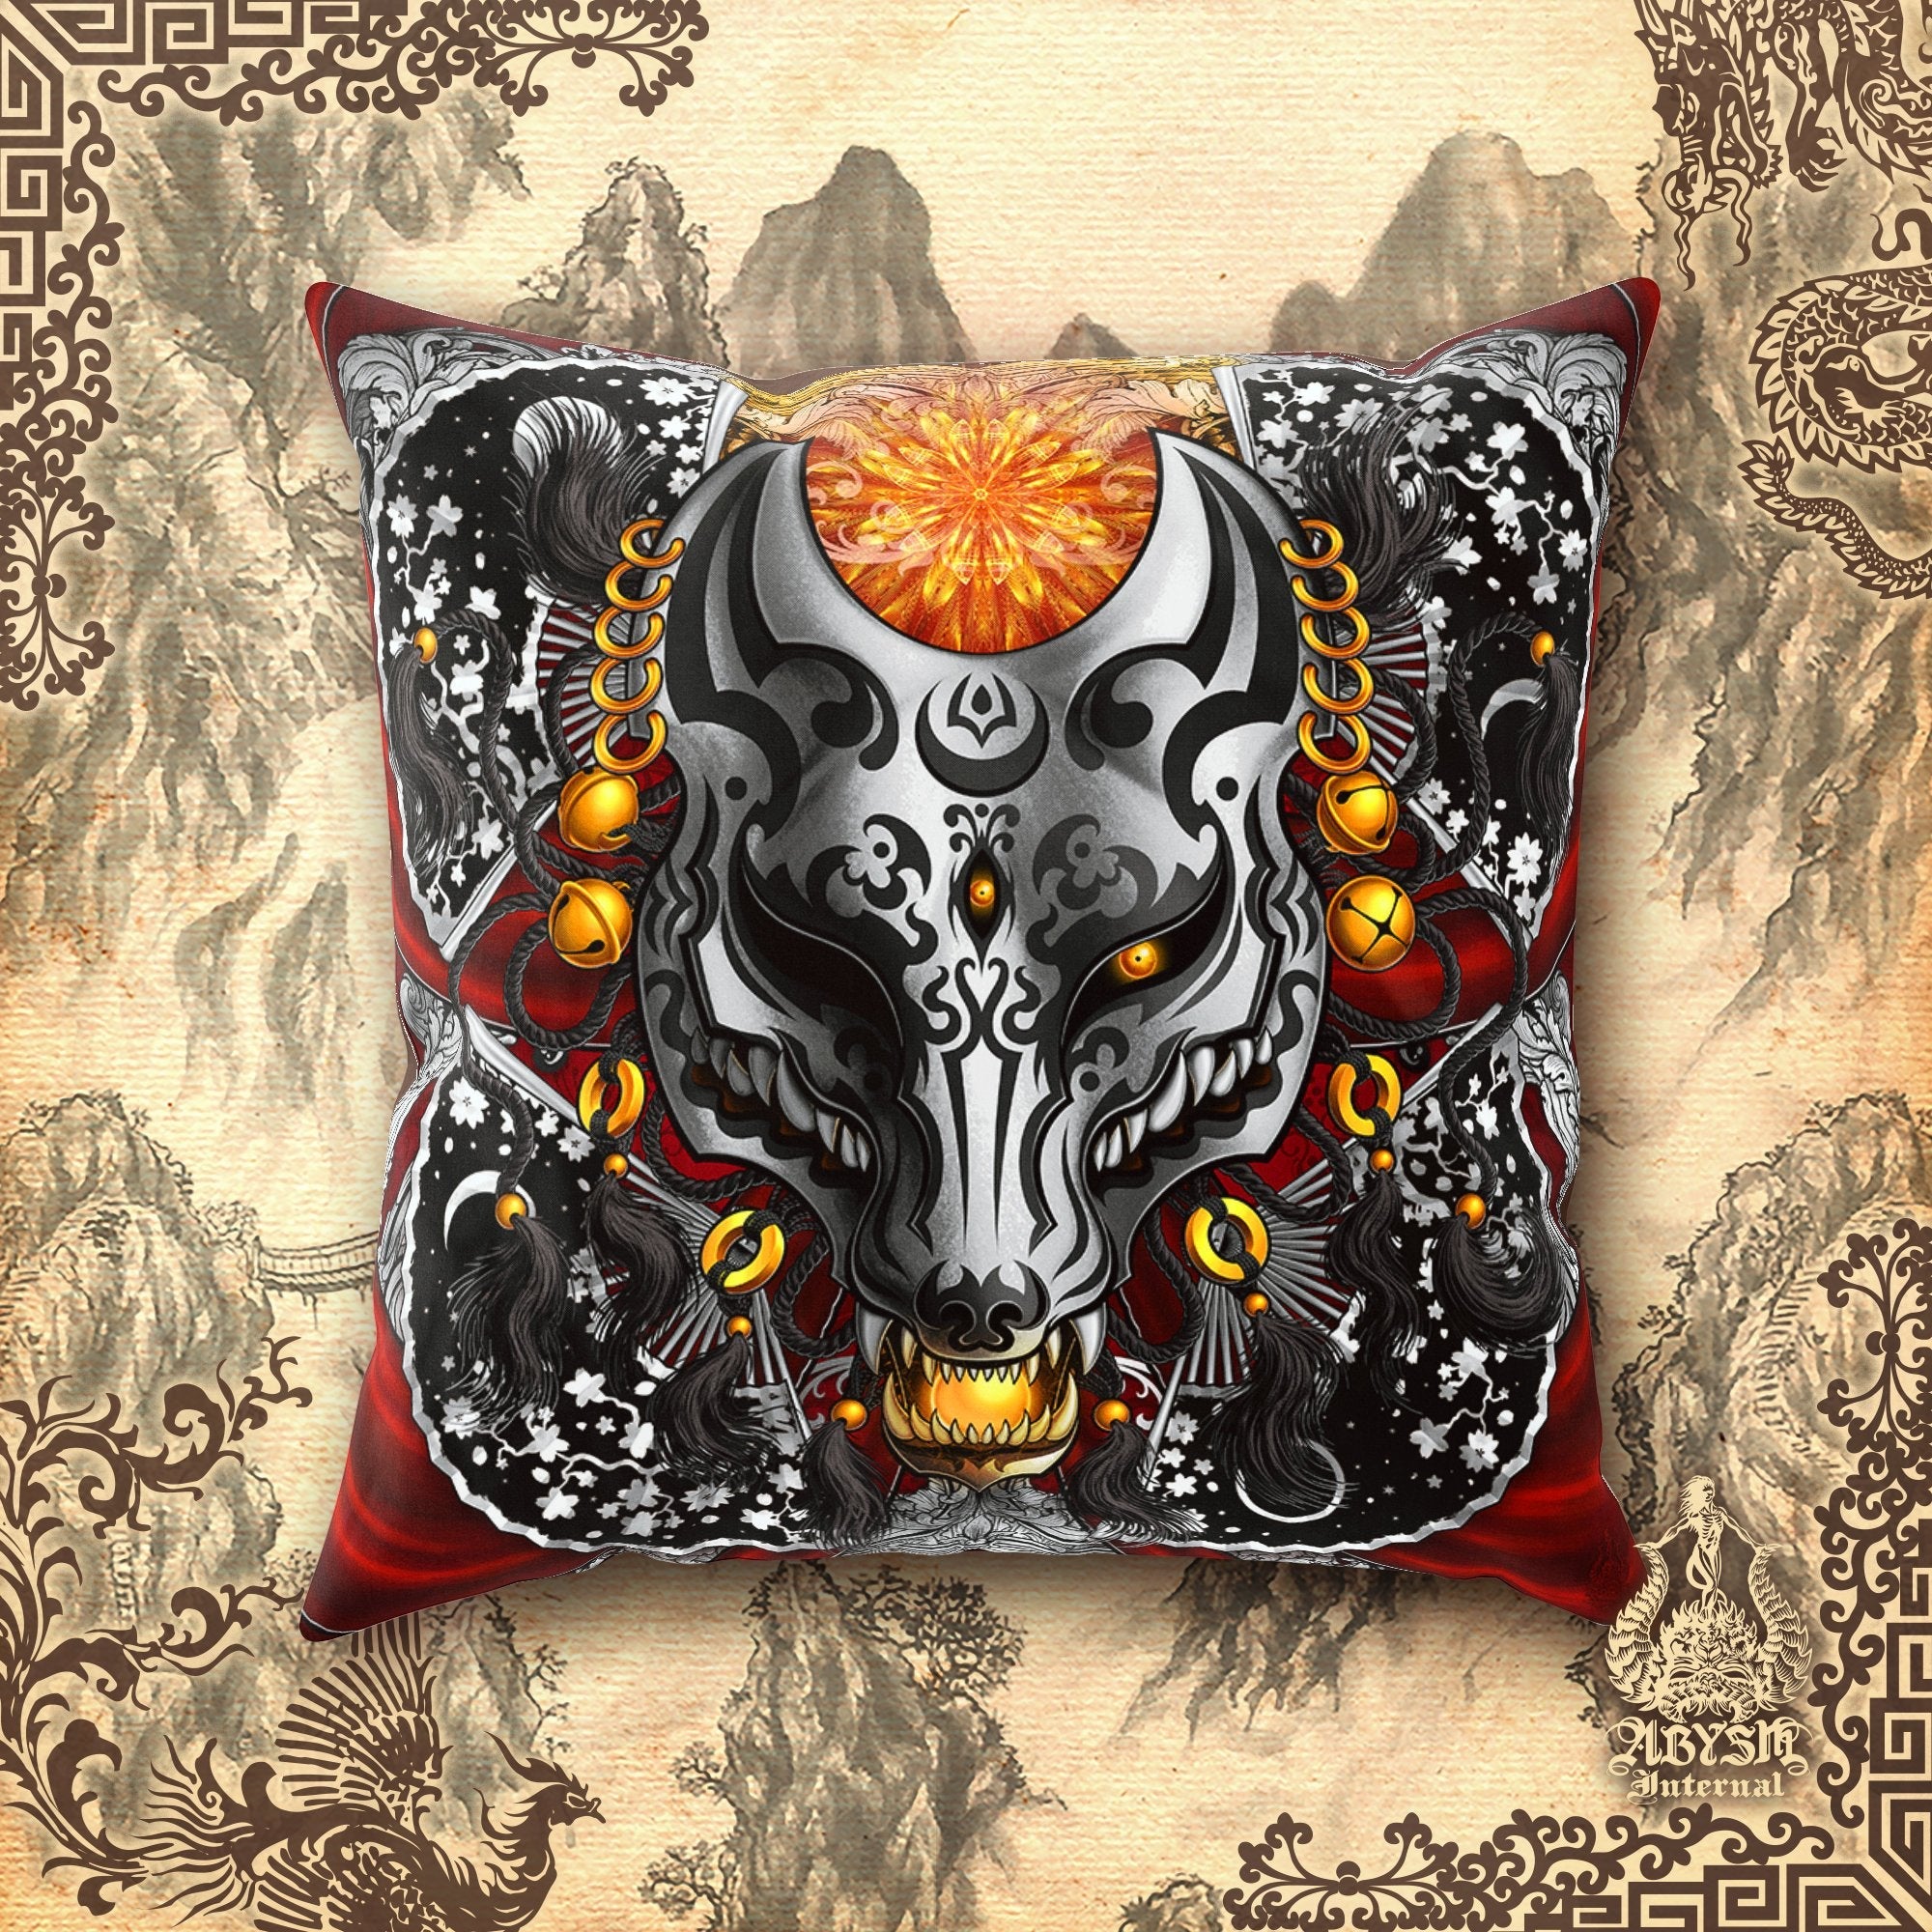 Kitsune Throw Pillow, Decorative Accent Cushion, Japanese Fox Mask, Okami, Anime and Gamer Room Decor, Funky and Eclectic Home - Silver - Abysm Internal